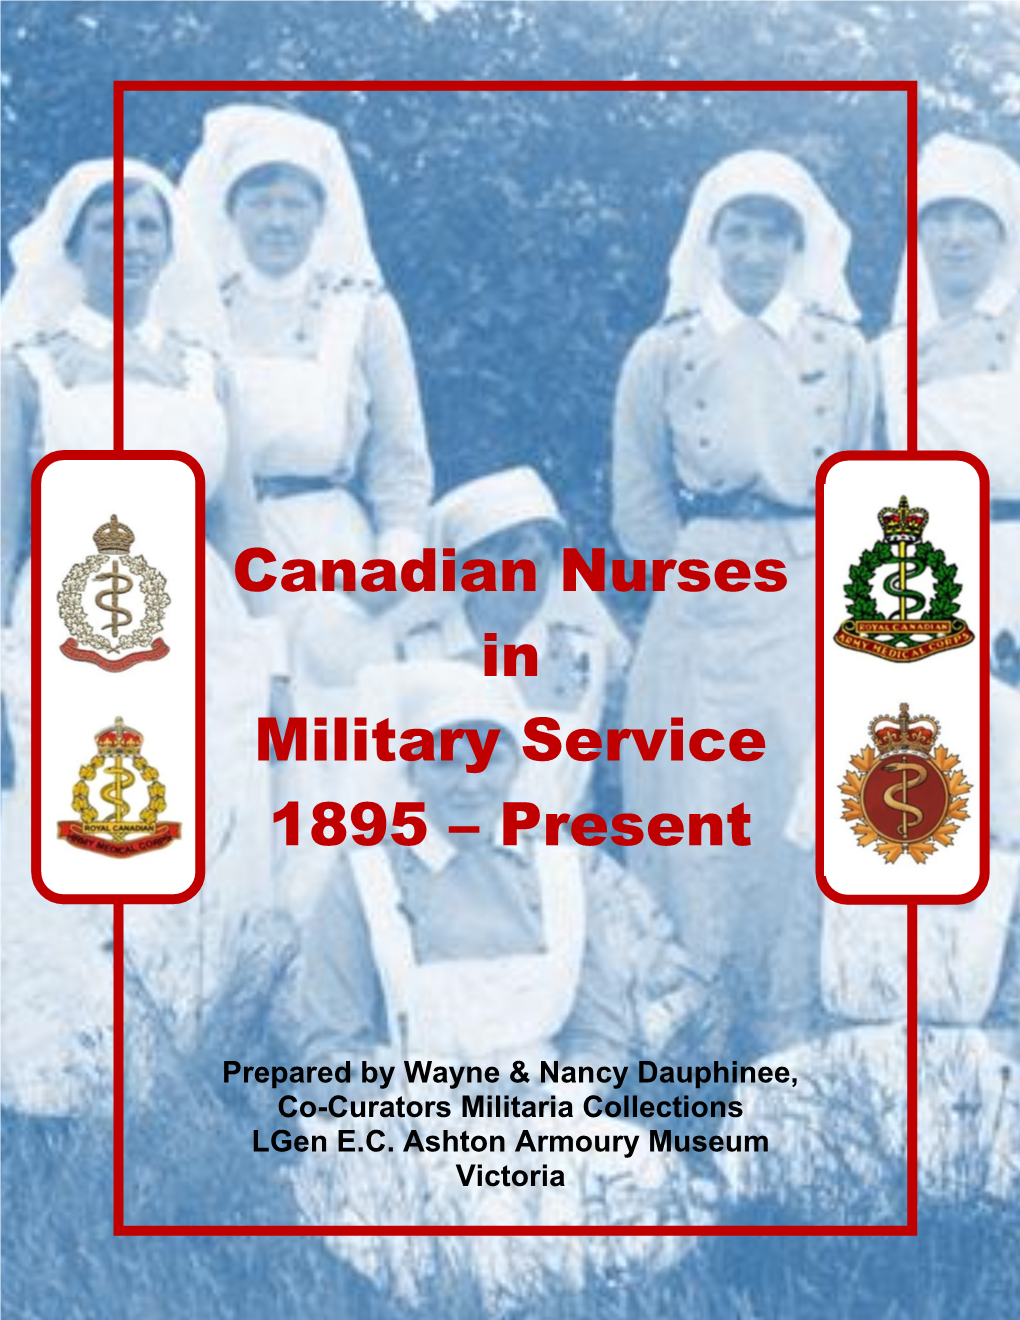 Canadian Nurses in Military Service 1895 – Present